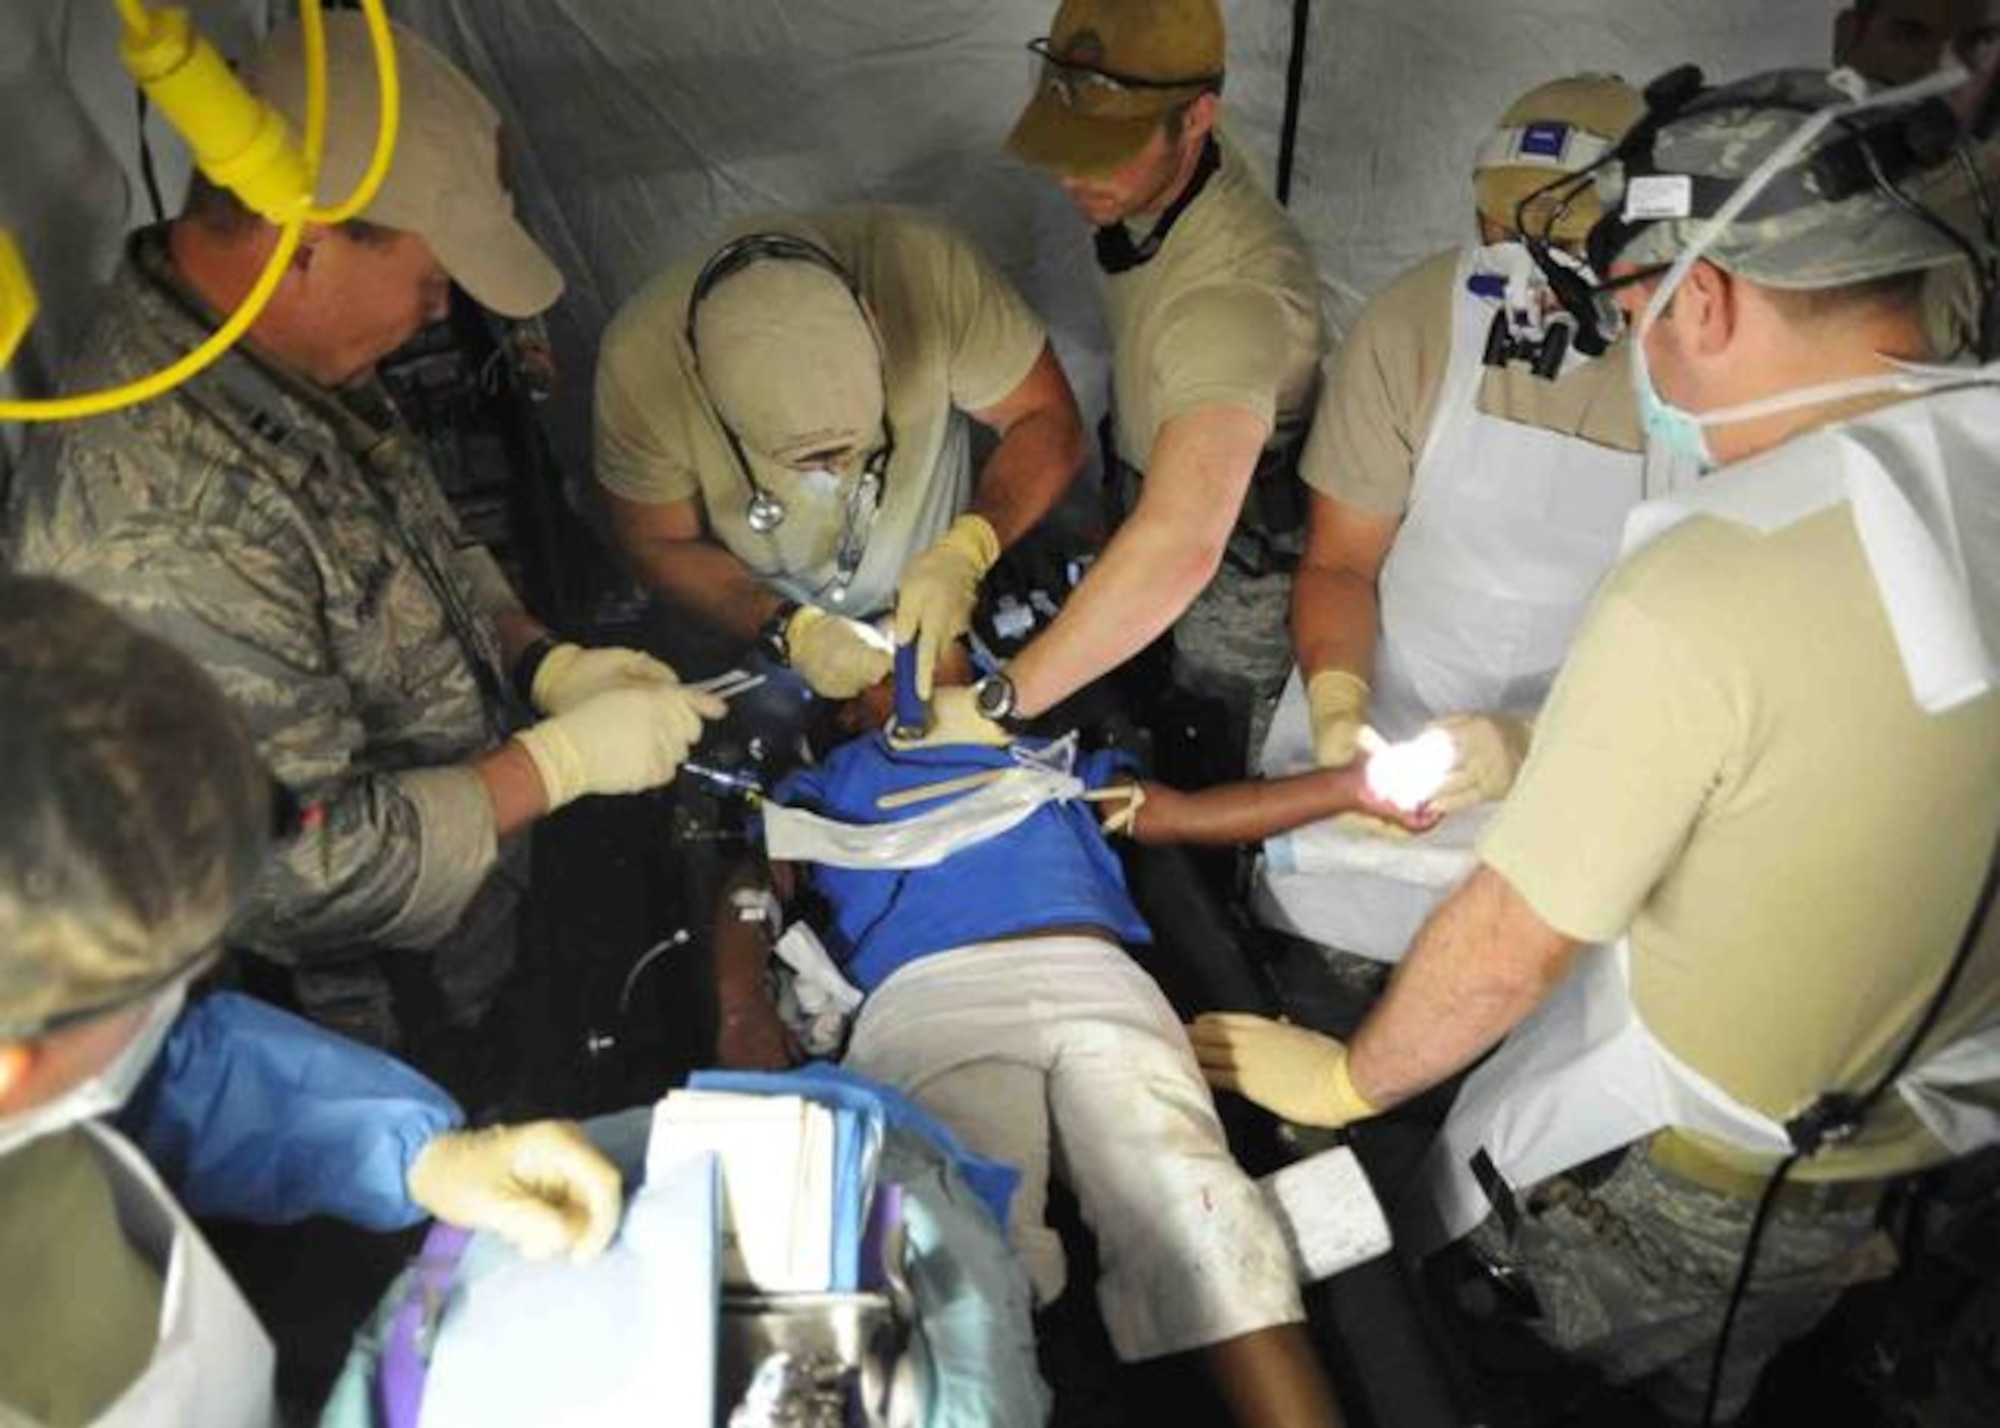 U.S. Airmen with the 1st Special Operations Support Squadron offer medical assistance to a Haitian girl at the Toussaint Louverture International Airport in Port-au-Prince, Haiti, Jan. 16, 2010. (U.S. Navy photo by Mass Communication Specialist 2nd Class Justin Stumberg/Released)